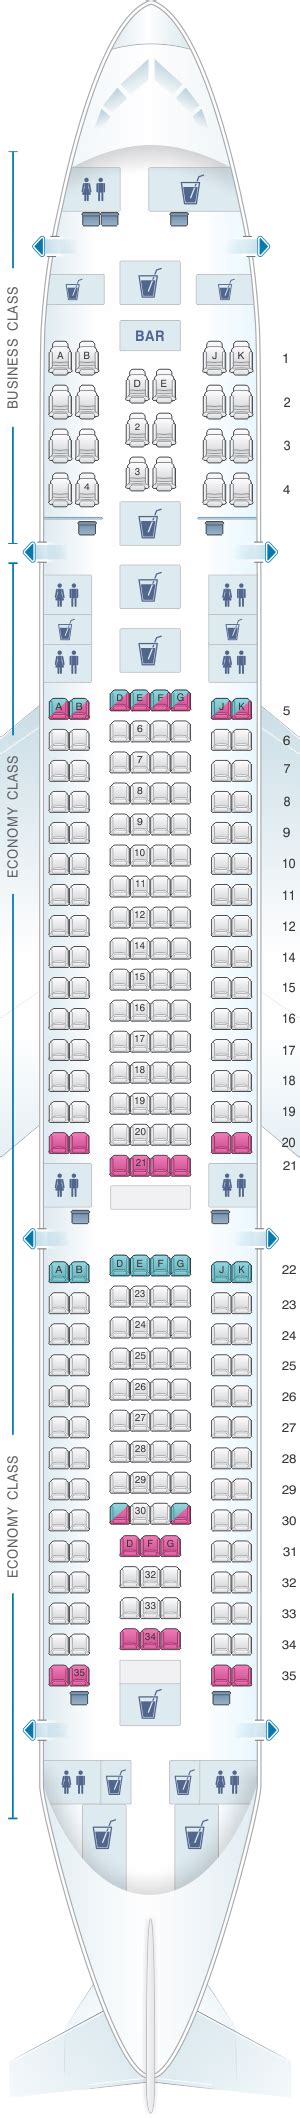 Seat Map Turkish Airlines Airbus A330 200 Seatmaestro